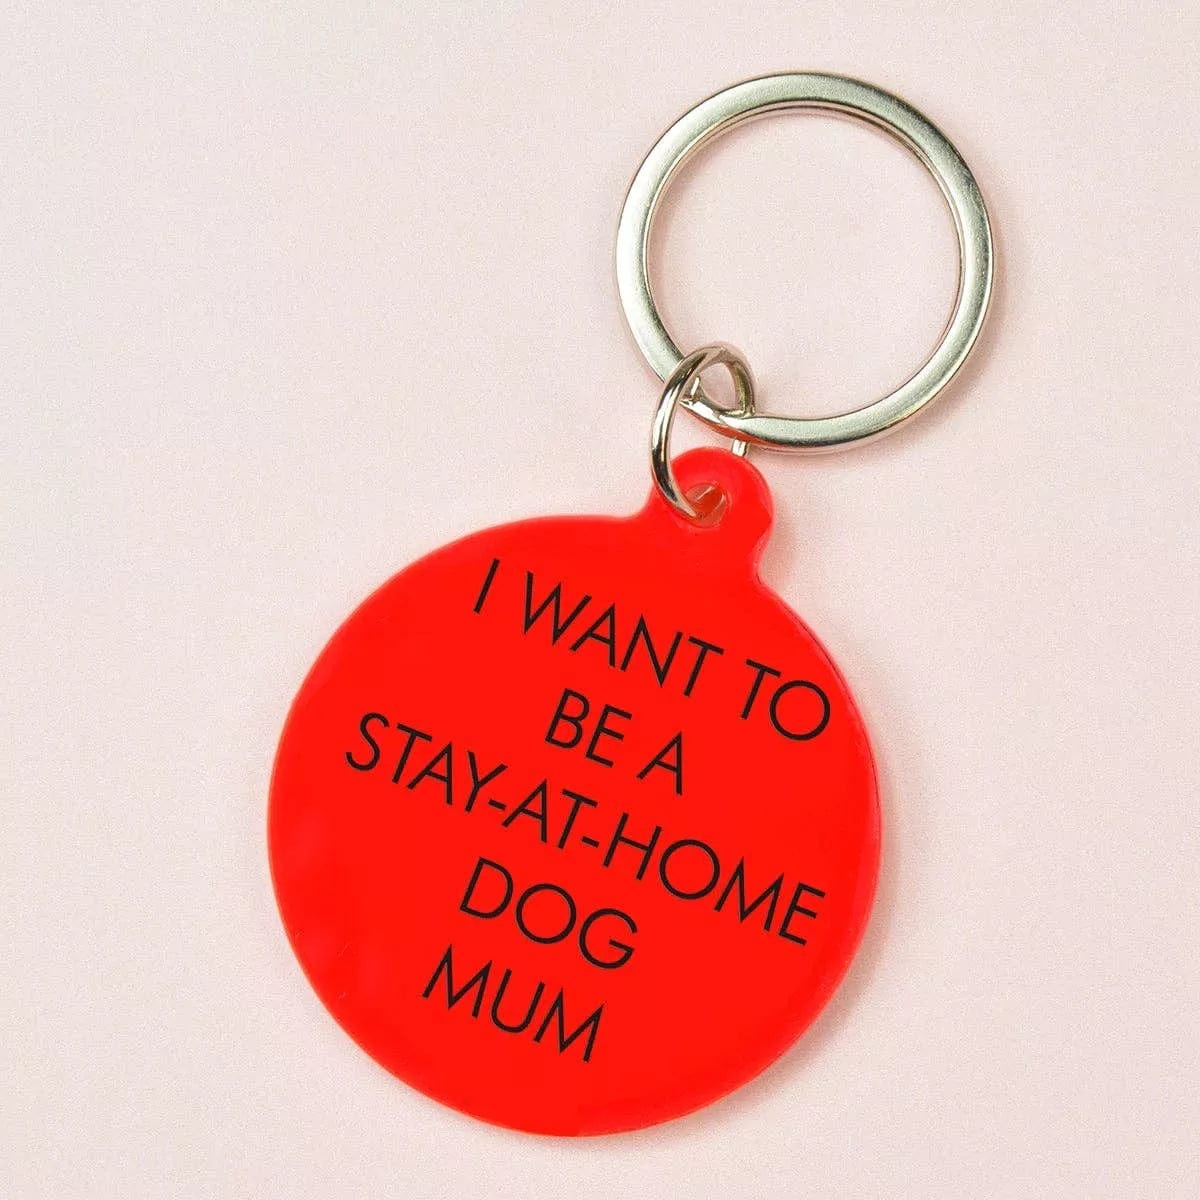 Flamingo Candles 'I Want to be a Stay-at-Home Dog Mum' Keyring